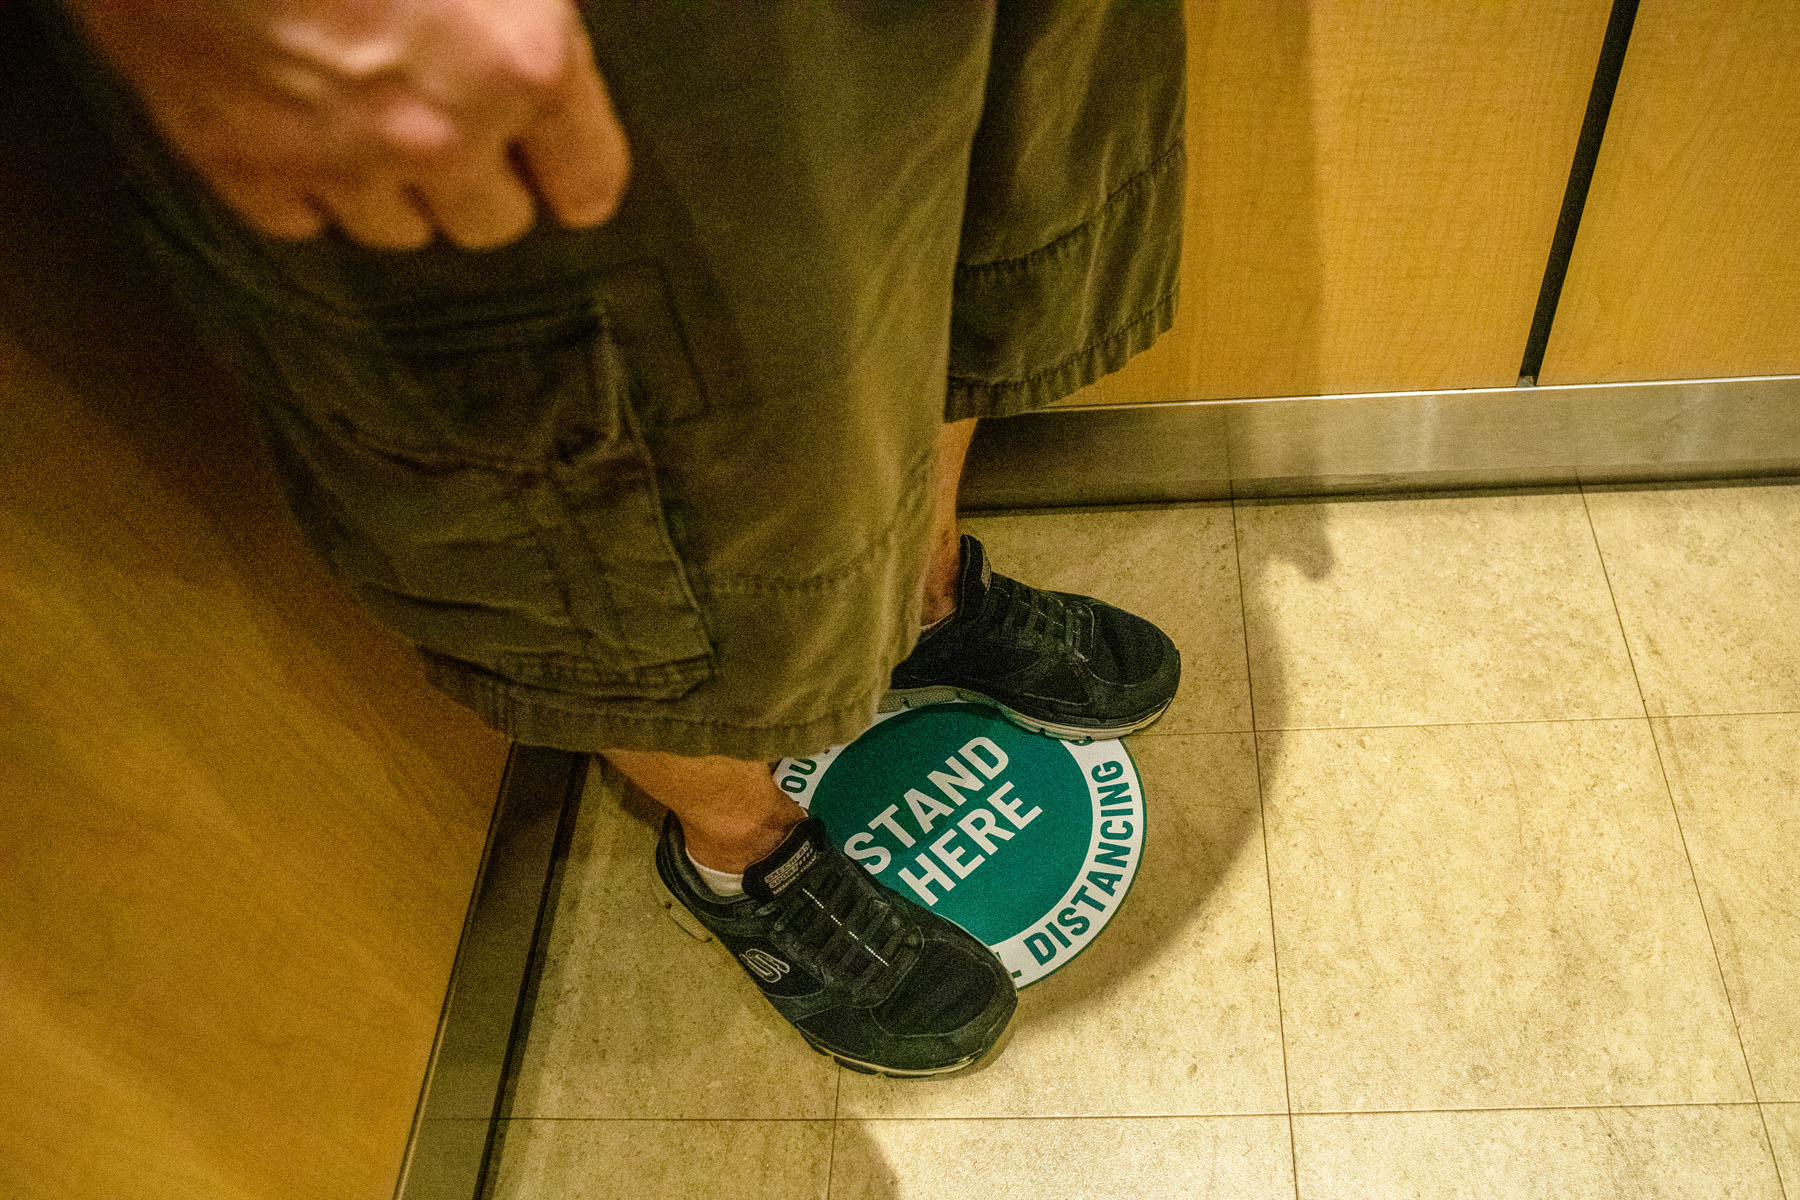 A person stands on a social distancing floor marker